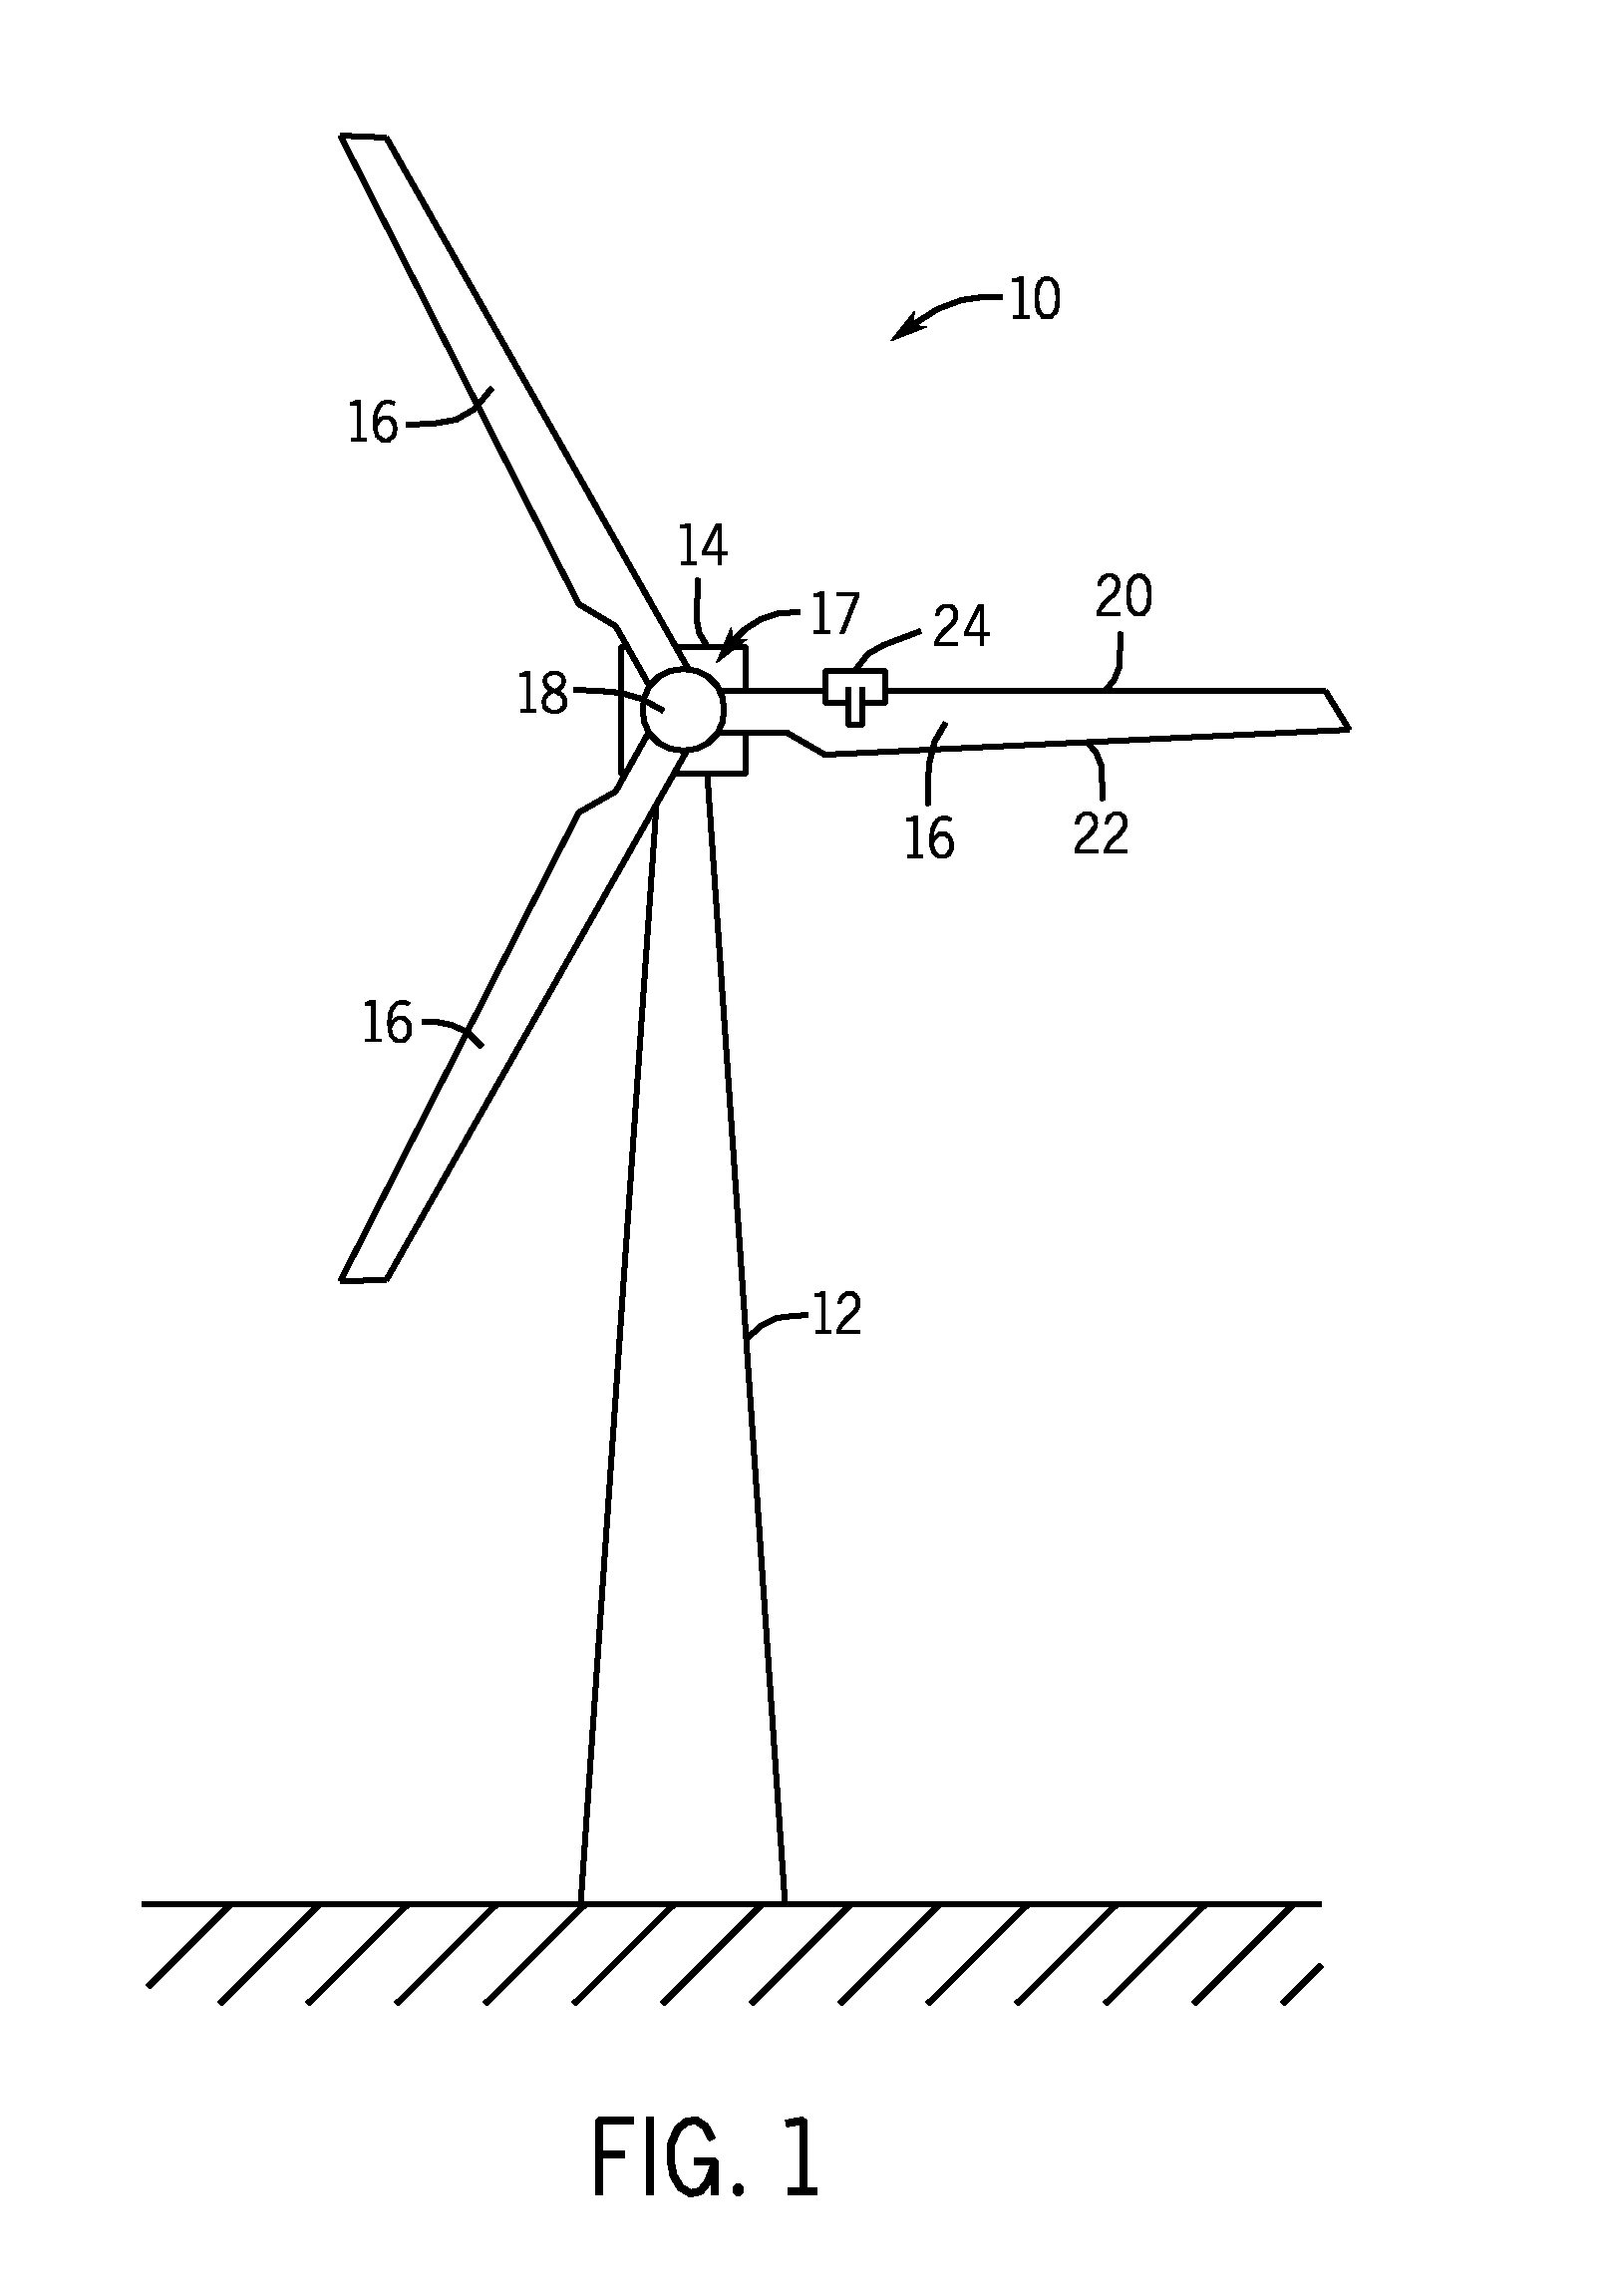 Wind turbine blade inspection and cleaning system